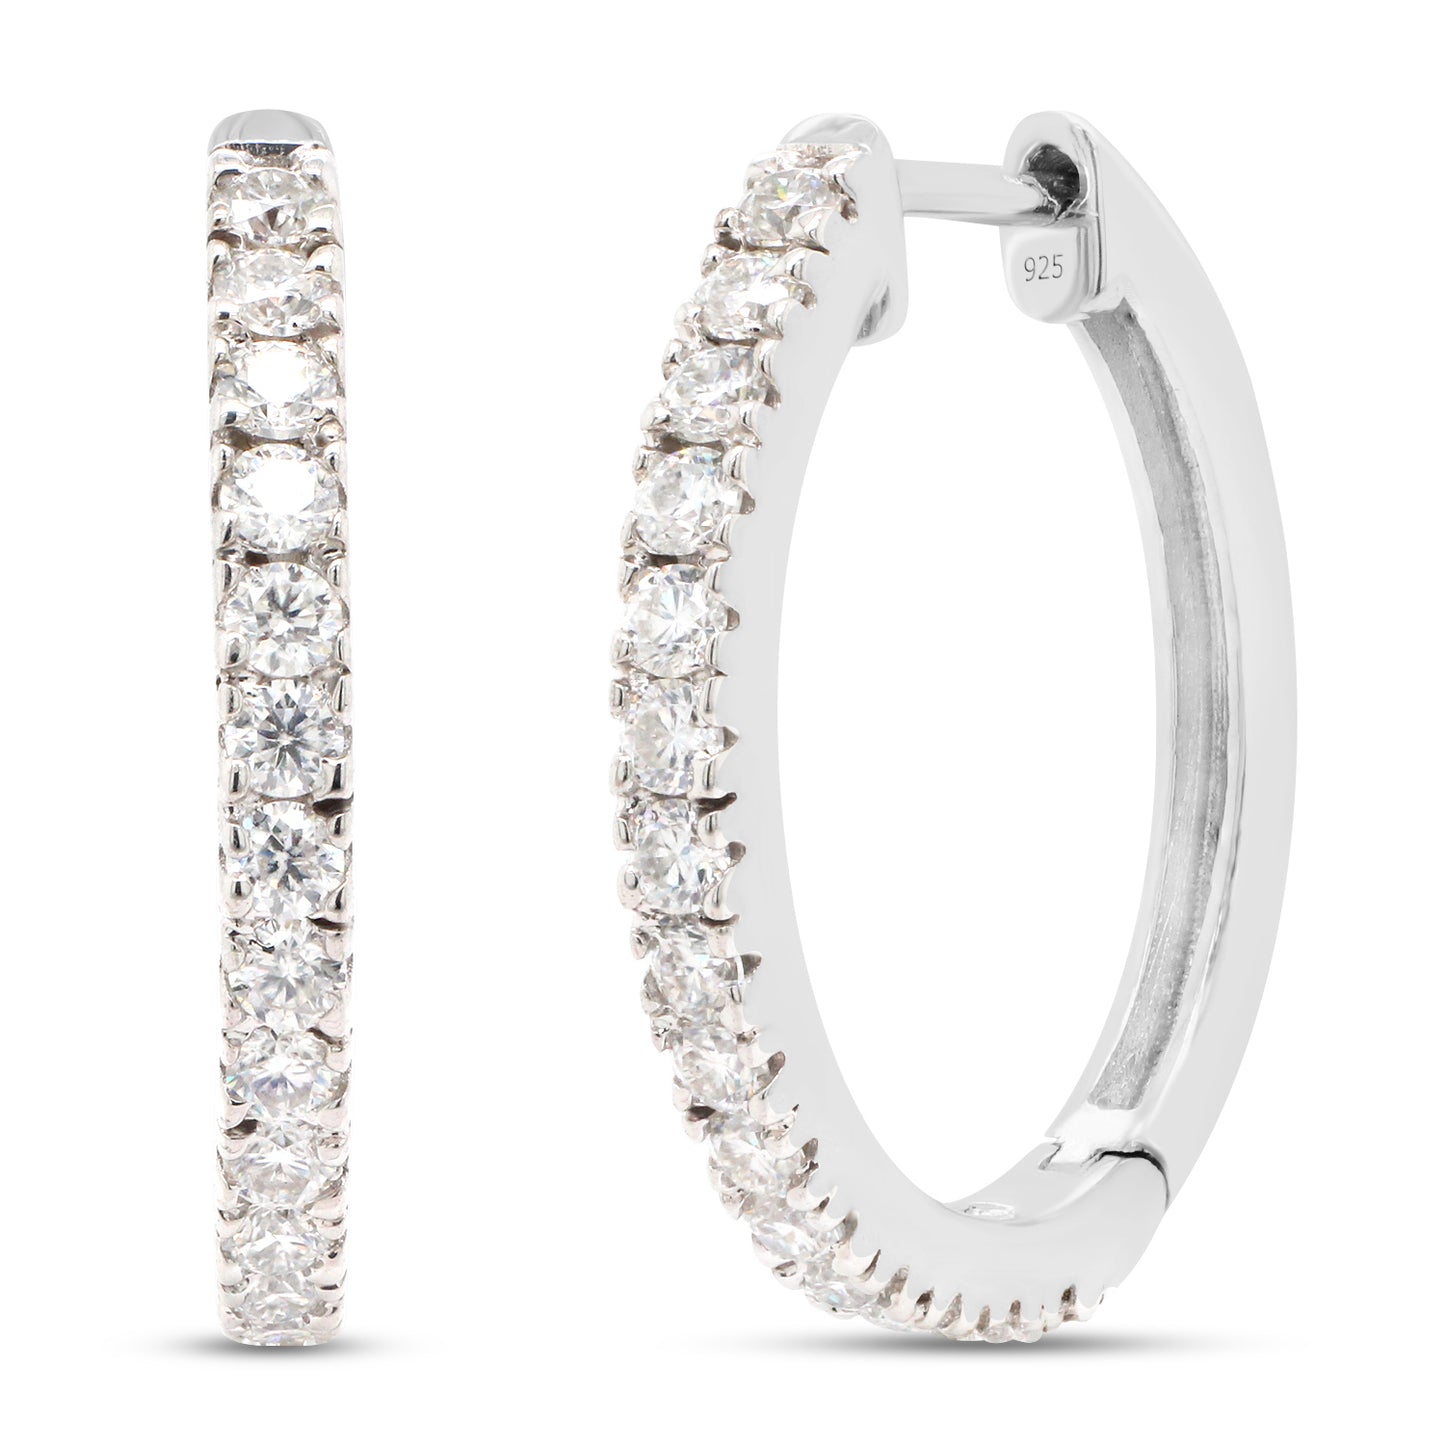 1.10 Carat Round Cut Lab Created Moissanite Diamond Hoop Earrings In 925 Sterling Silver Jewelry For Women